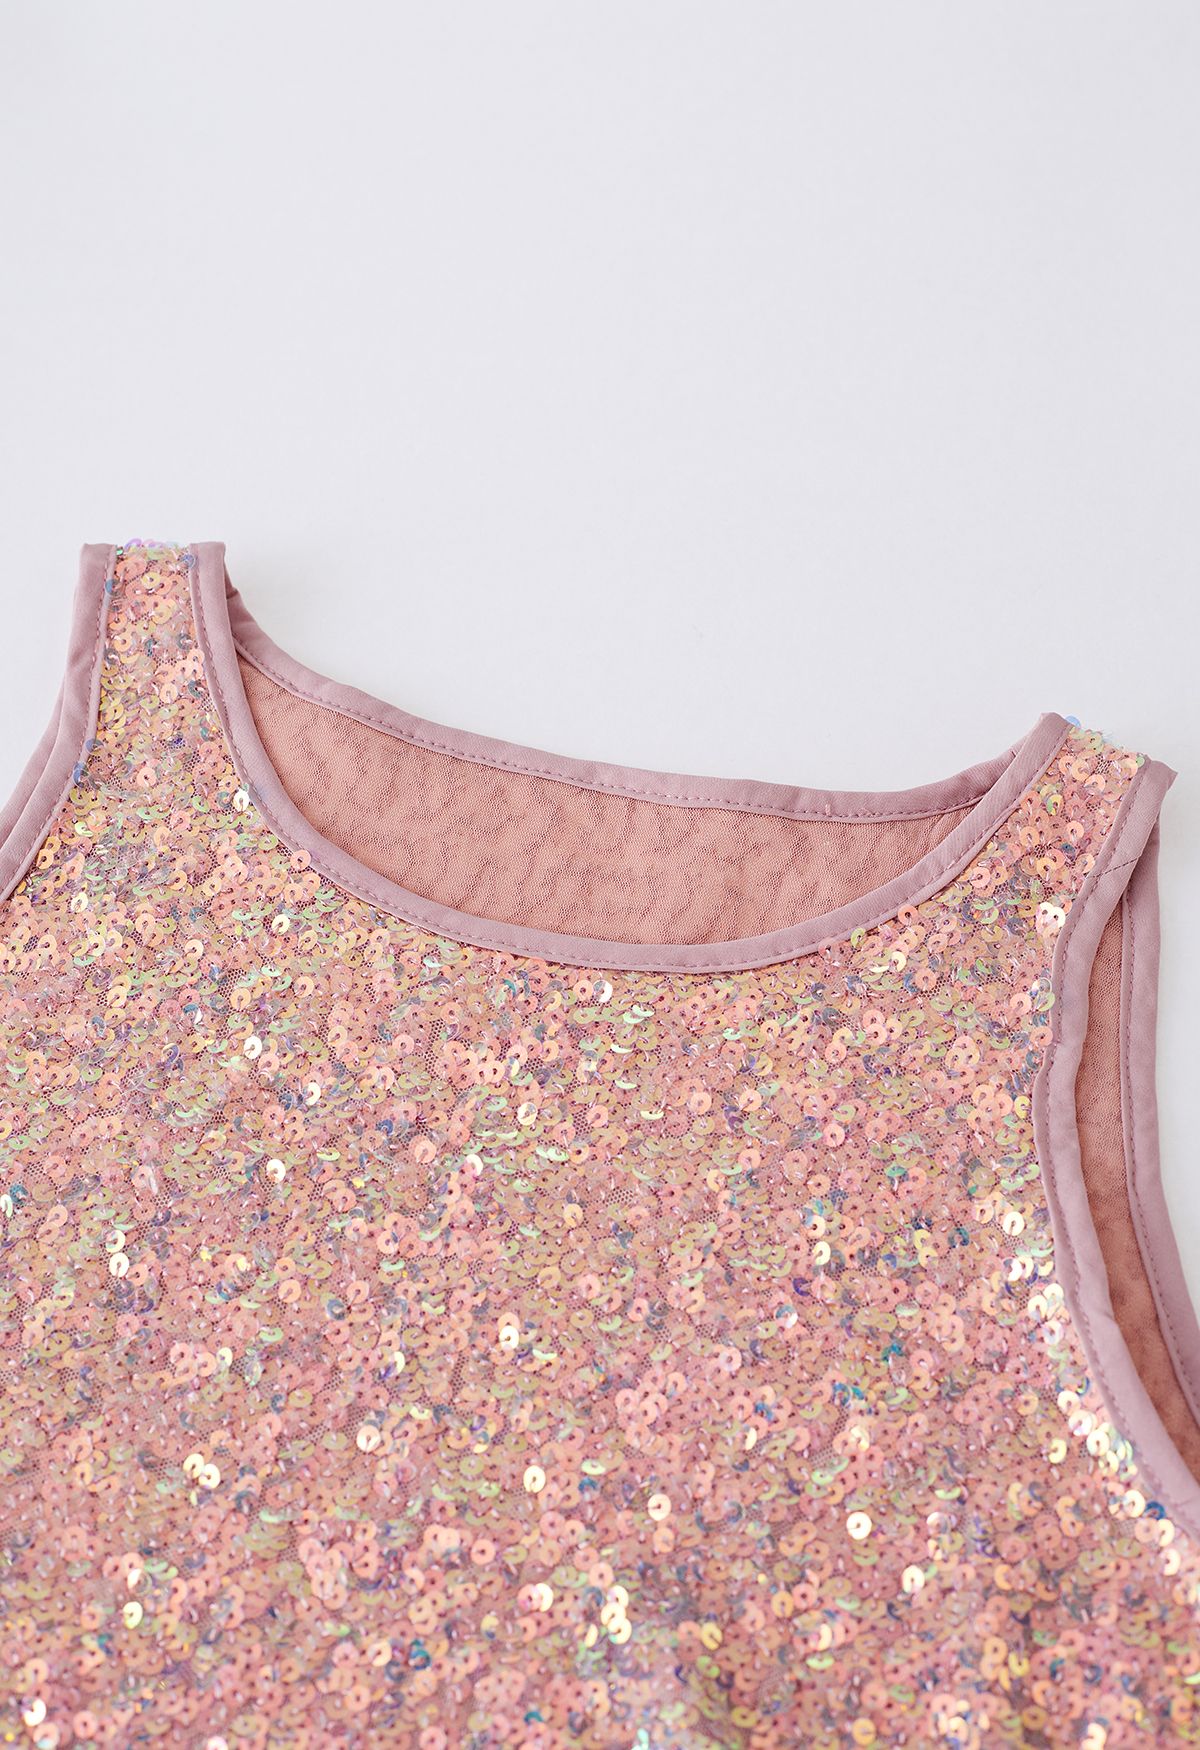 Ultra Sparkle Sequined Tank Top in Pink